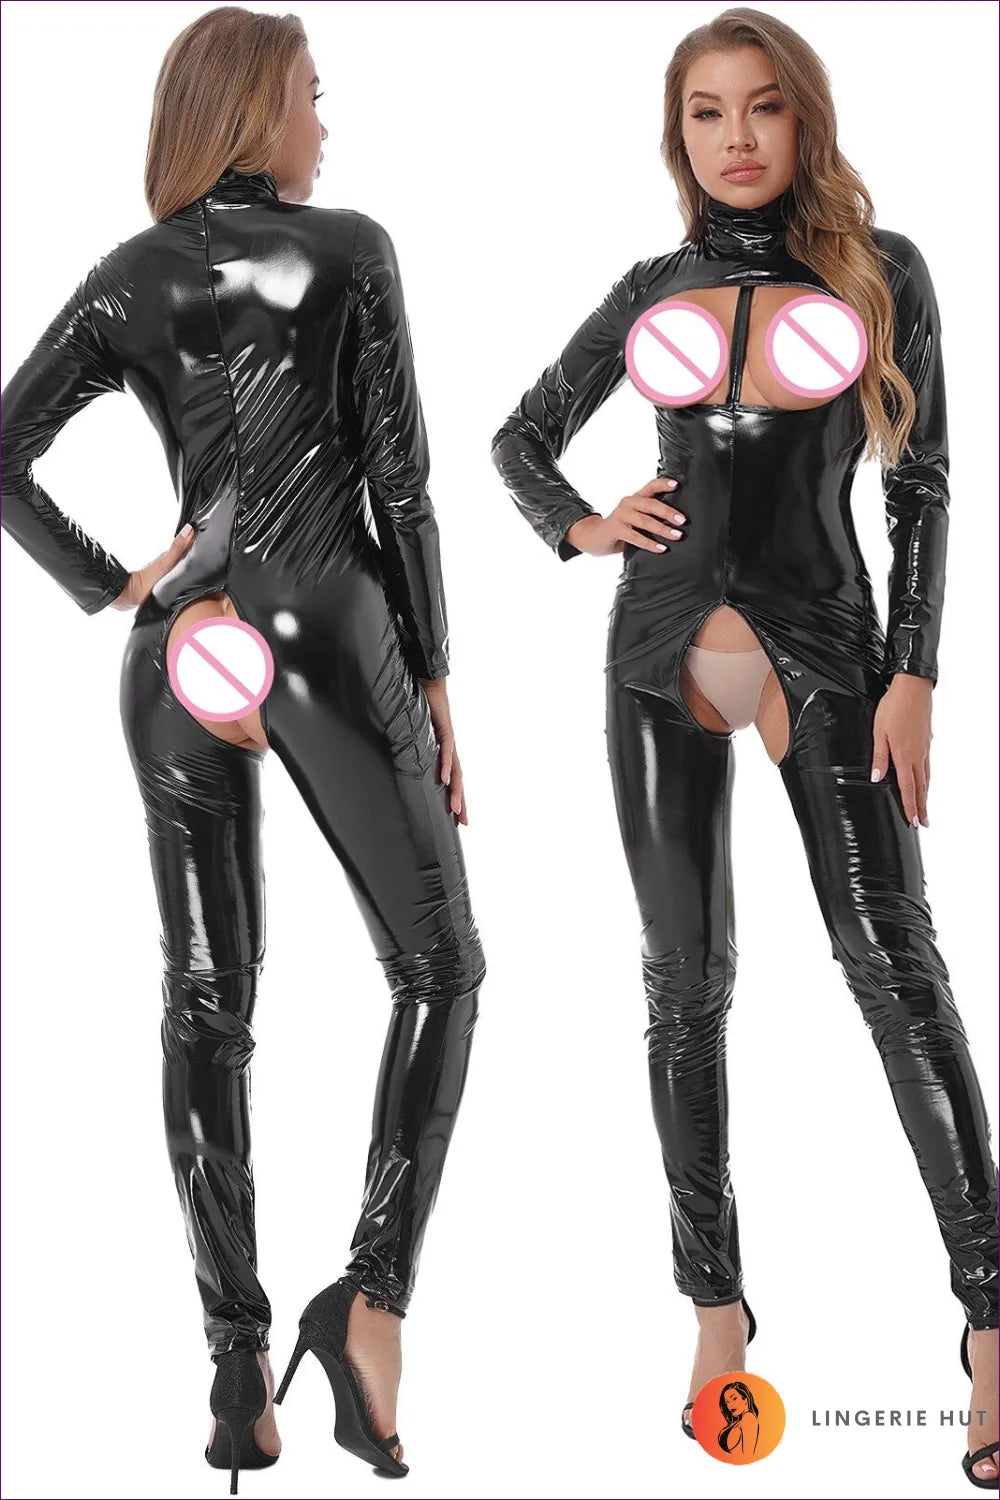 Turn Up The Heat With Our Latex Turtle Neck Cut-out Crotchless Catsuit. Featuring a Sleek, Crotchless Design